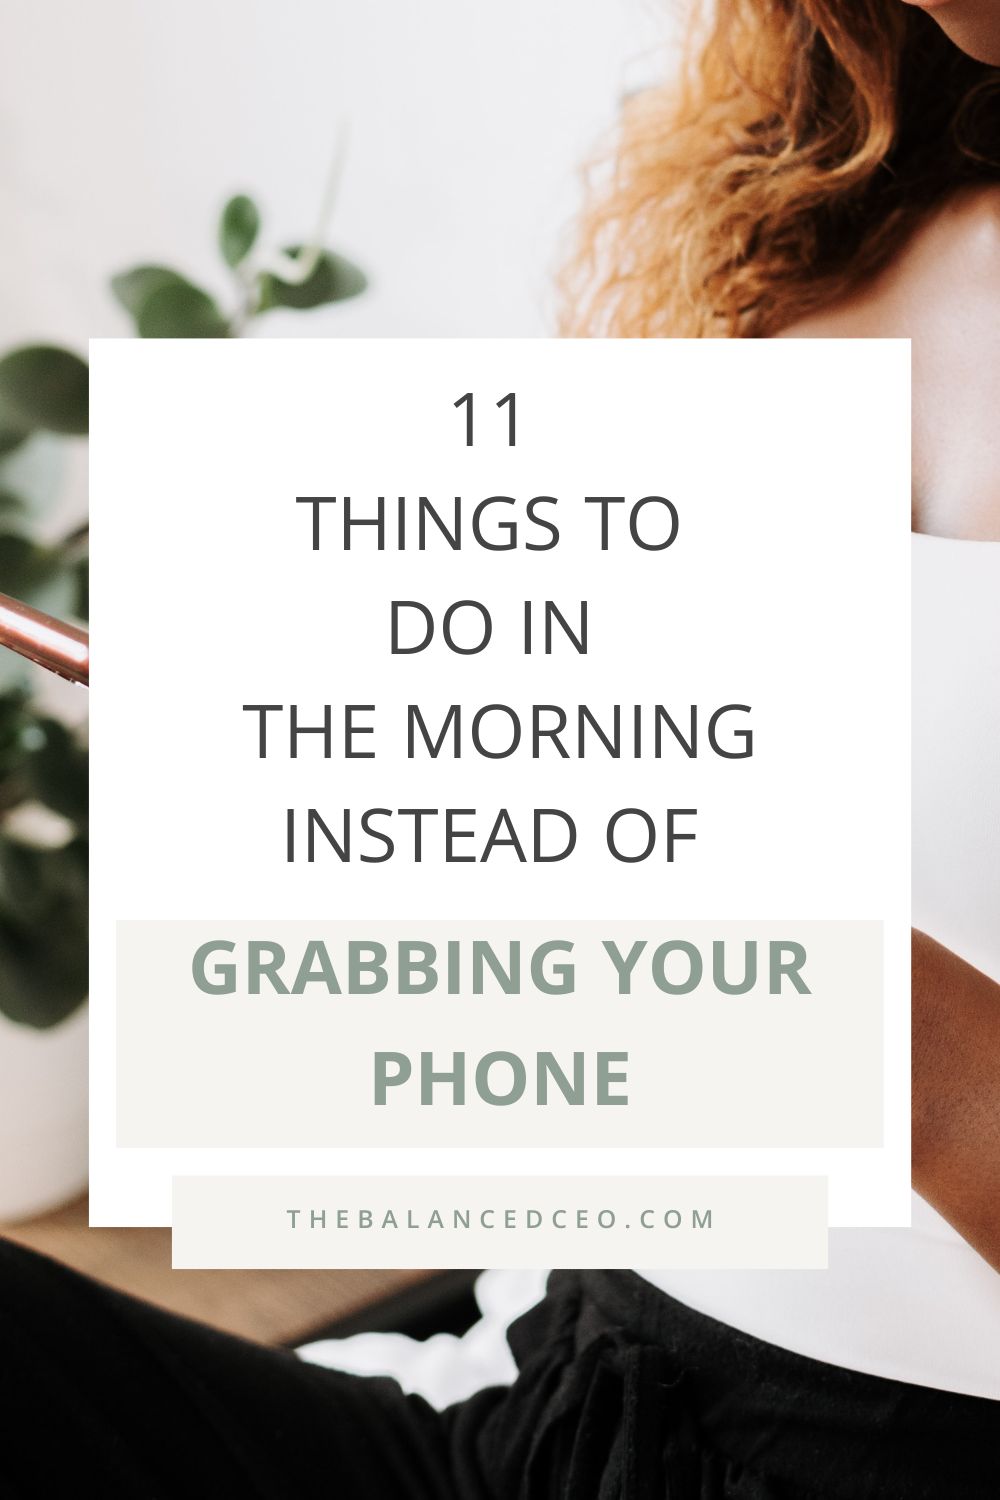 11 Things to Do in the Morning Instead of Grabbing Your Phone